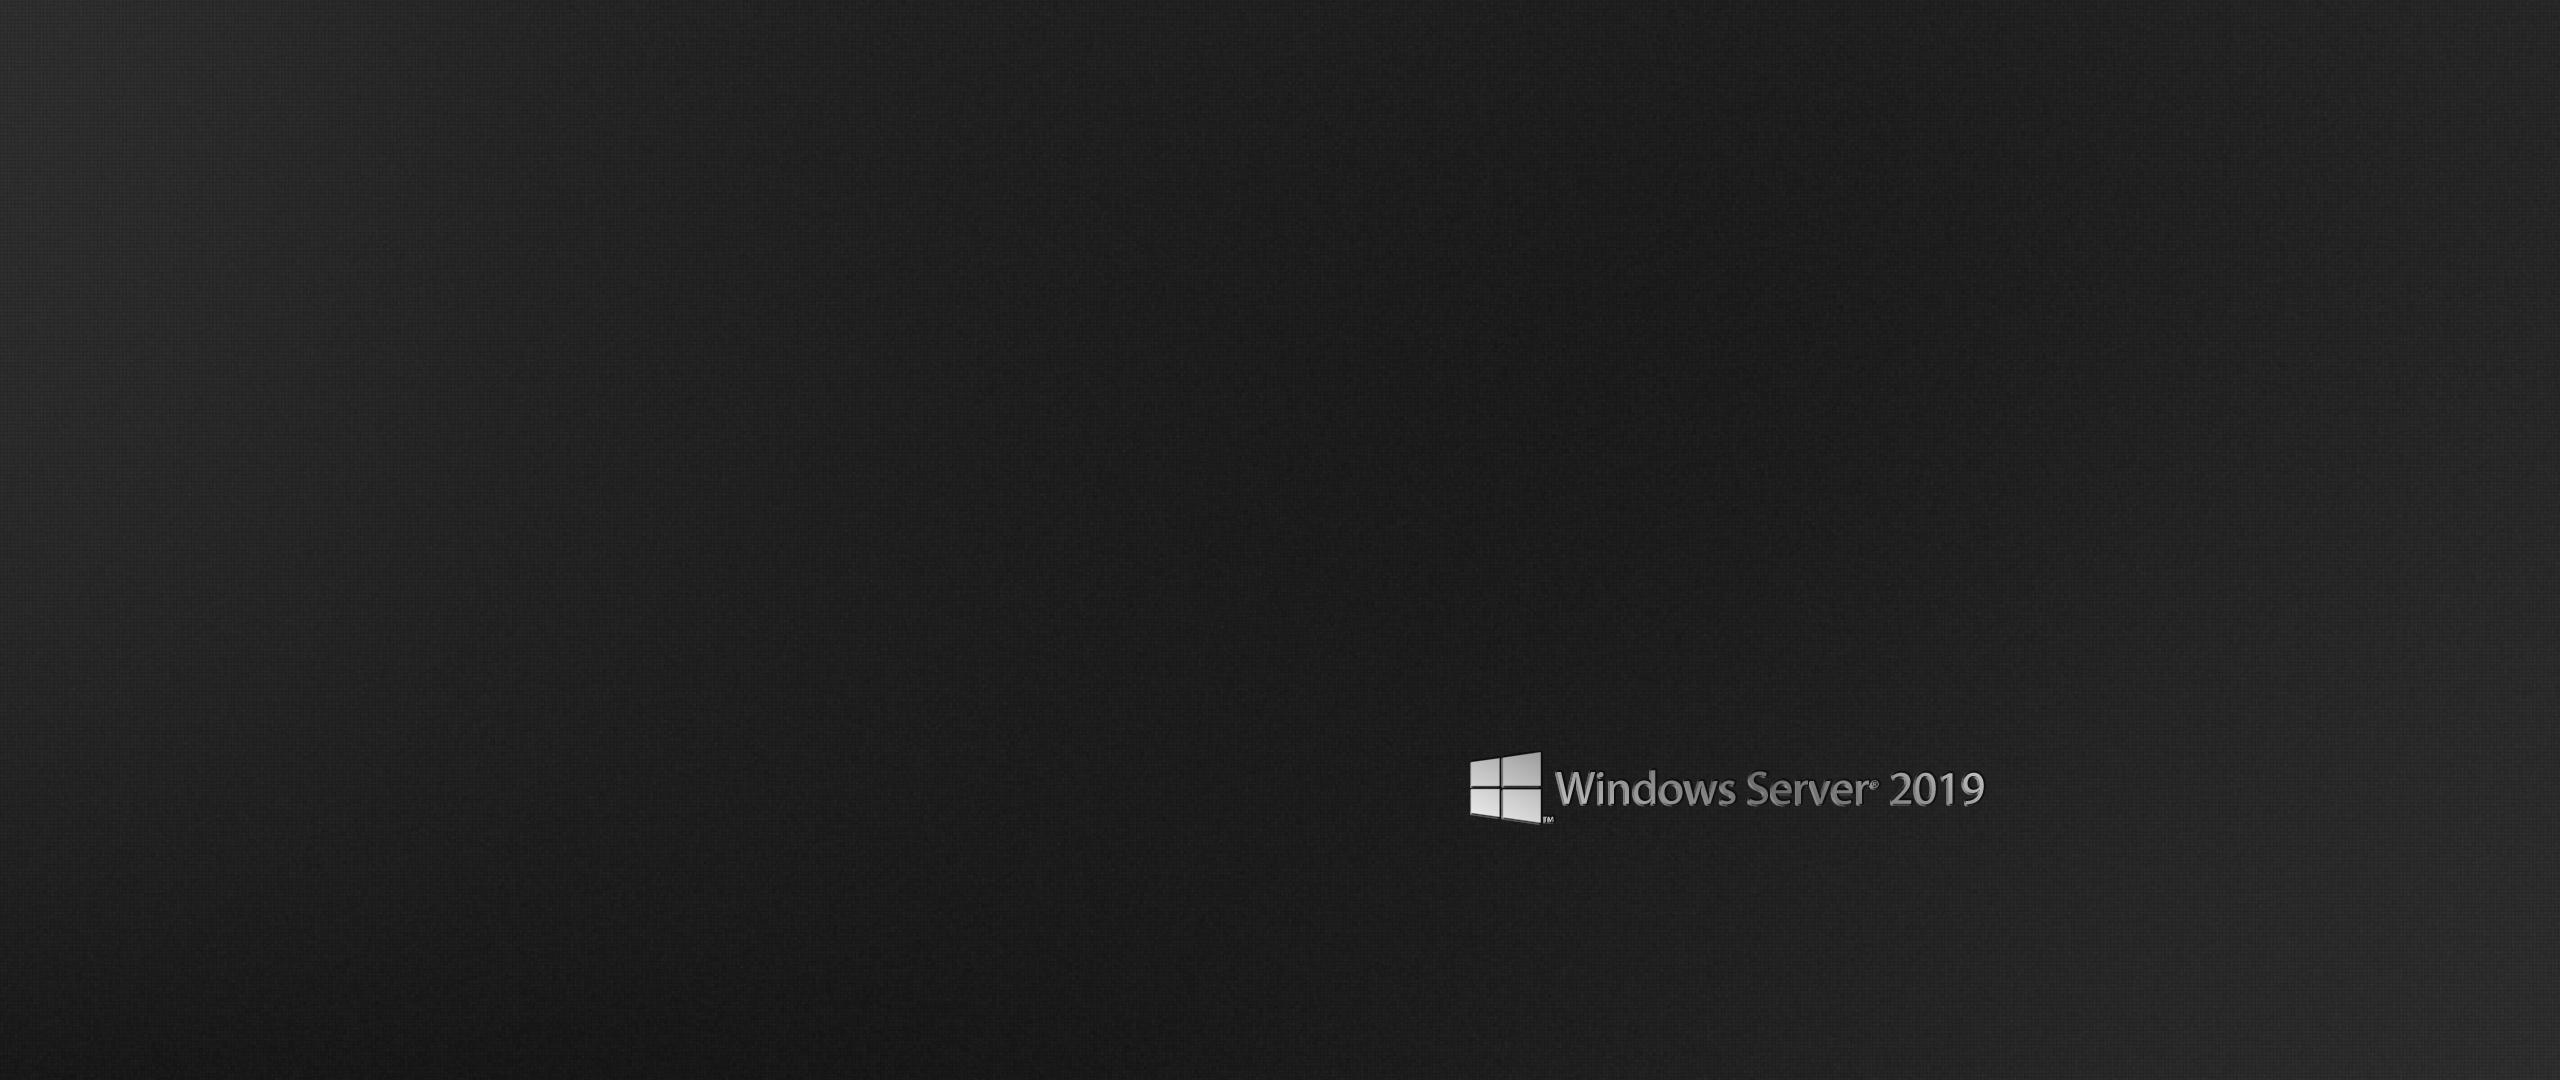 Saw some of the other Windows Server wallpaper posts and decided